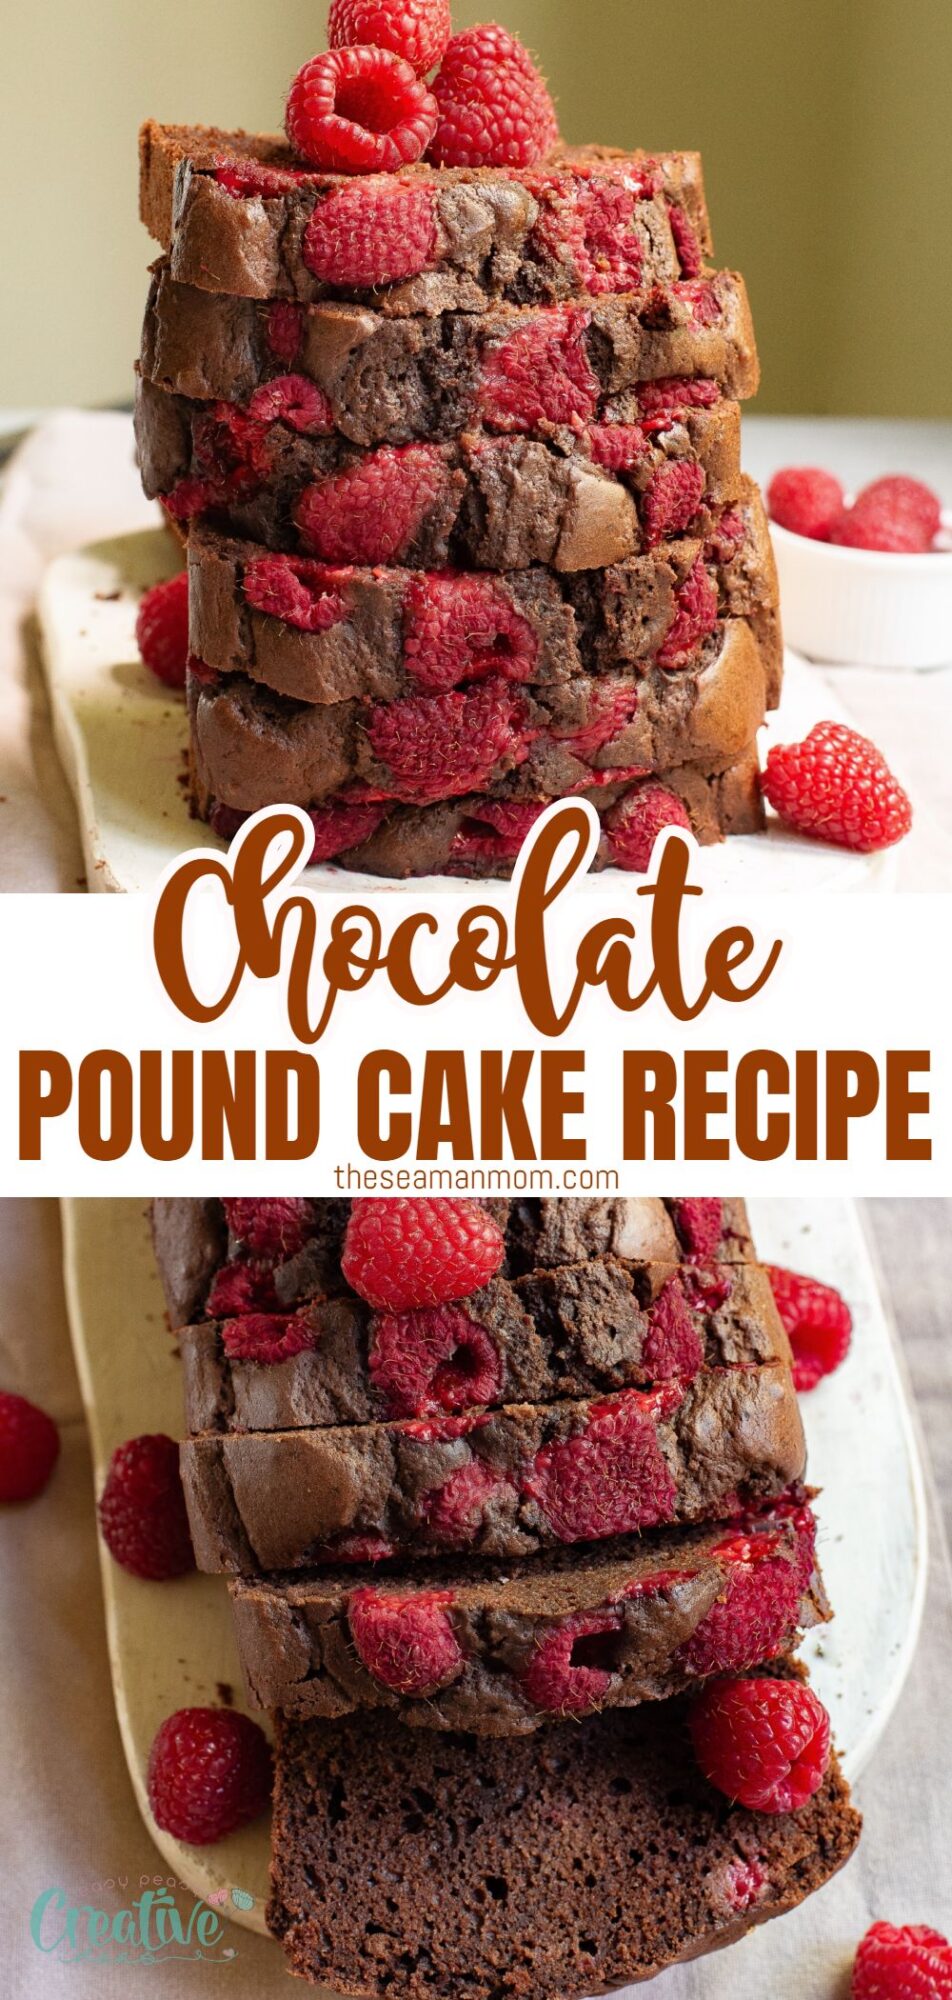 Decadent chocolate pound cake recipe - moist, delightful, and perfect for any occasion. Indulge in the delicious flavors today!